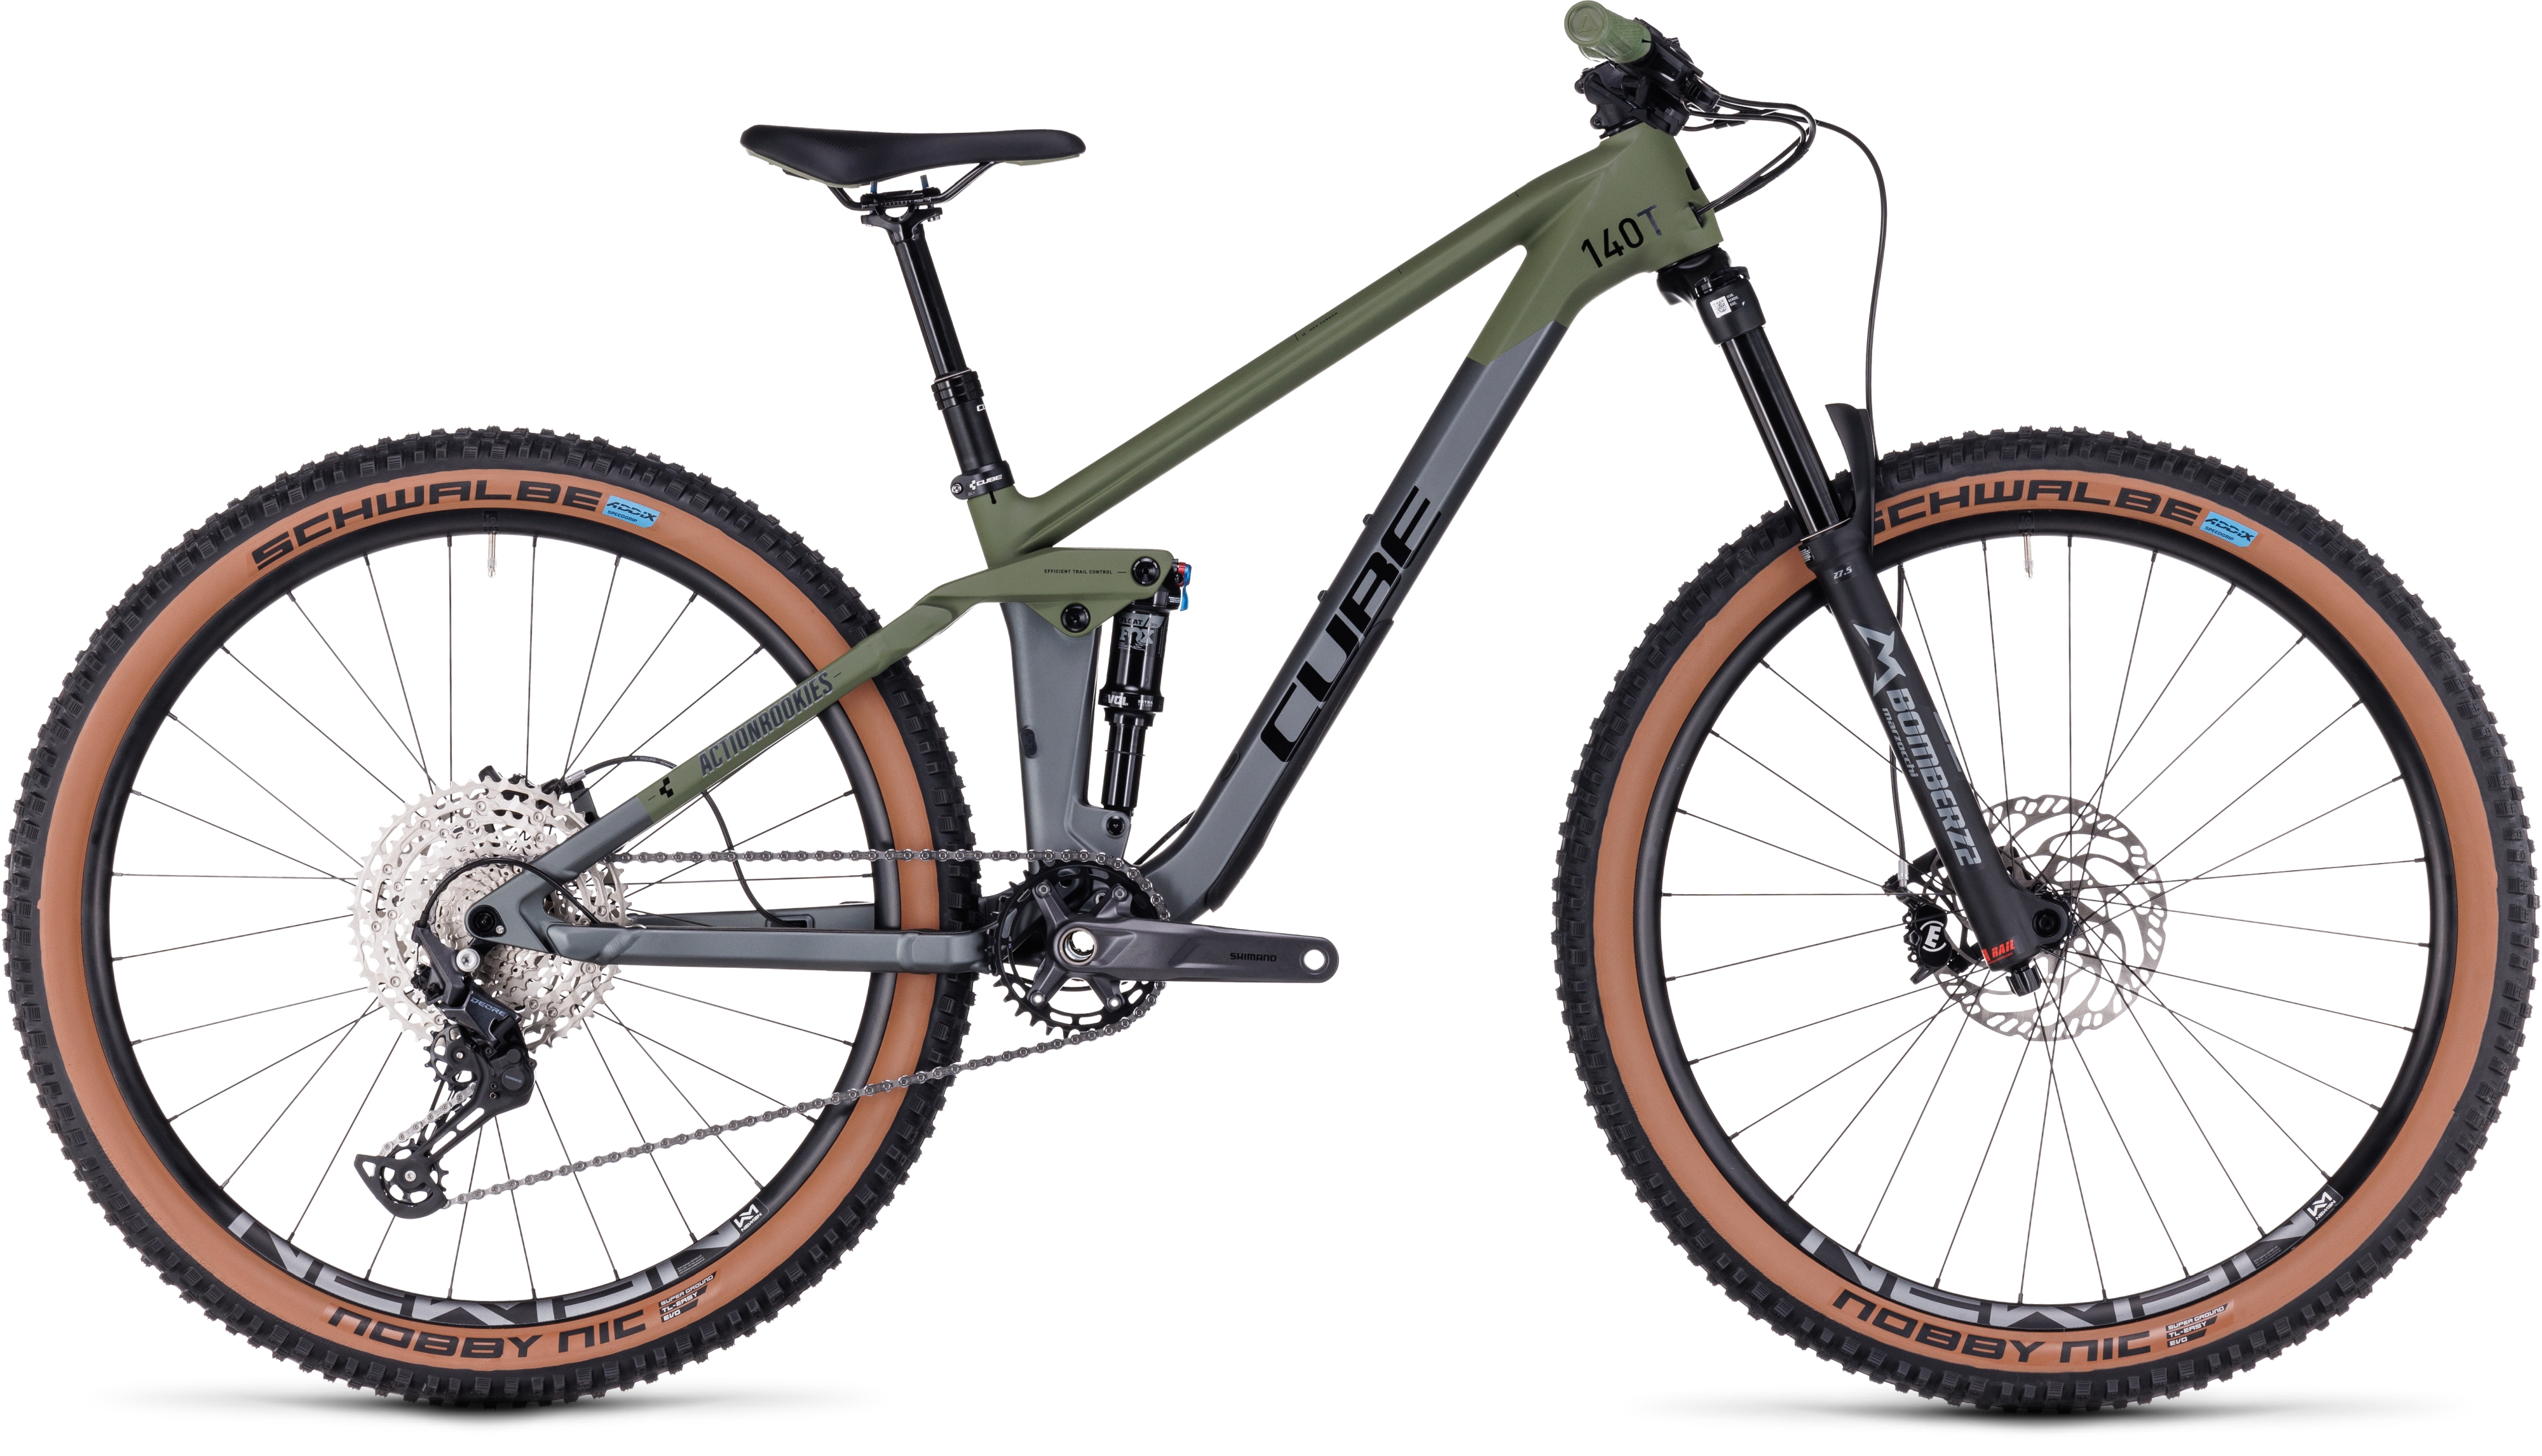 Cube Stereo 140 HPC Rookie grey´n´olive